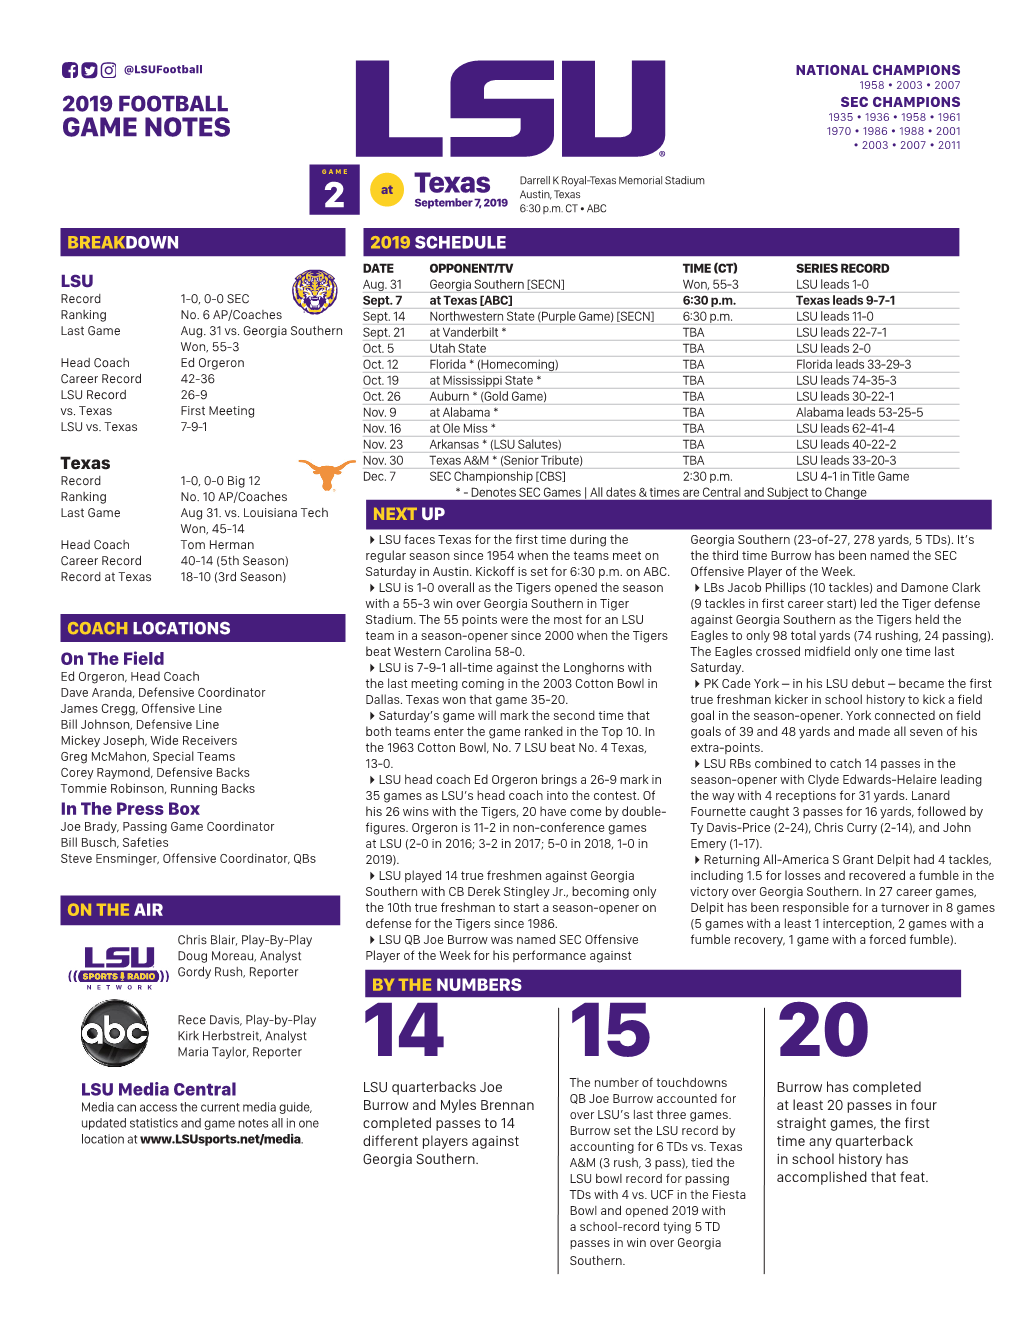 Game Notes • 2003 • 2007 • 2011